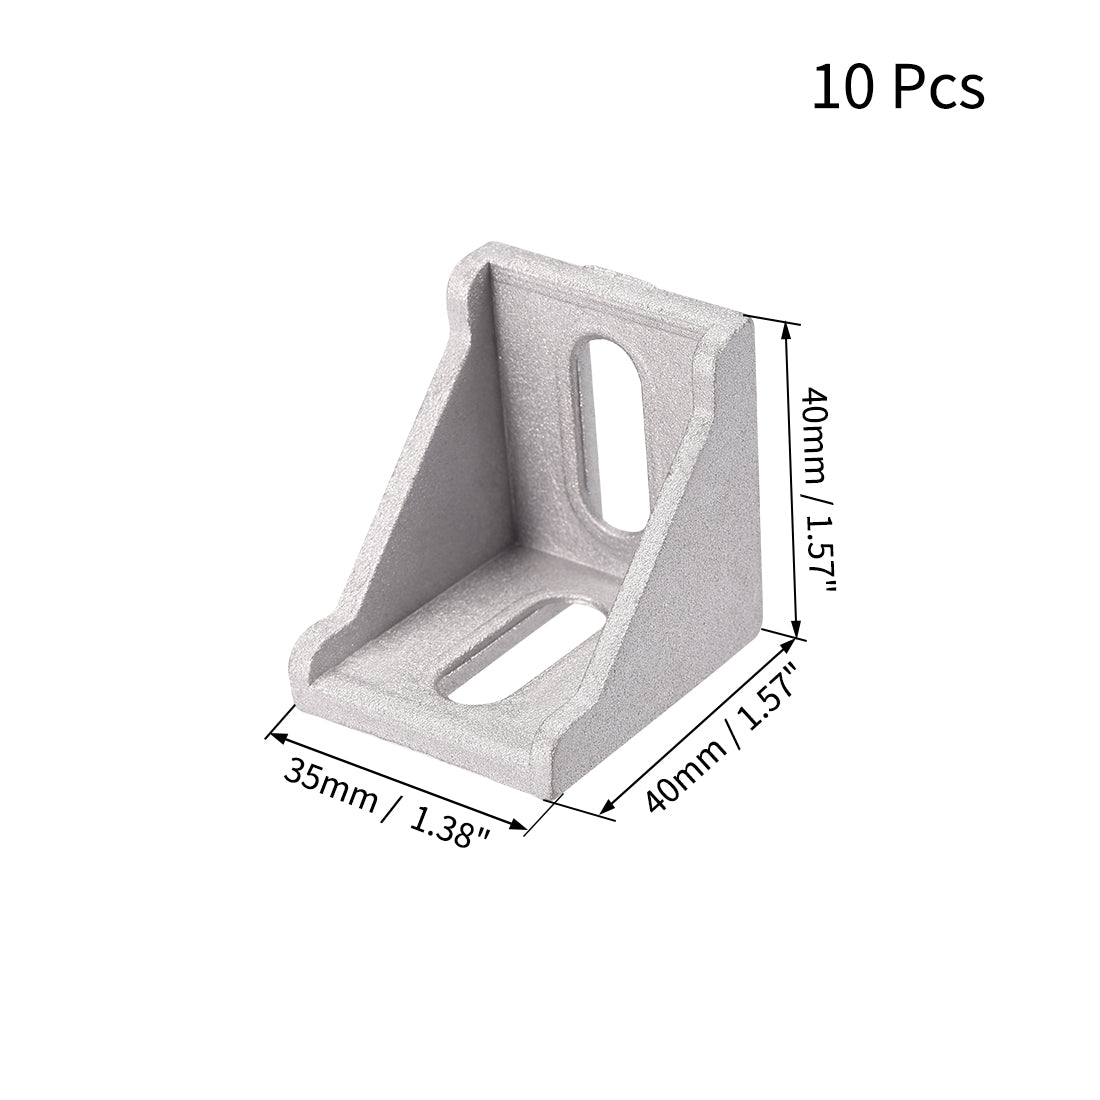 uxcell Uxcell Inside Corner Bracket Gusset, 40mm x 40mm for 4040 Series Aluminum Extrusion Profile with Slot 8mm, 10 Pcs (Silver)